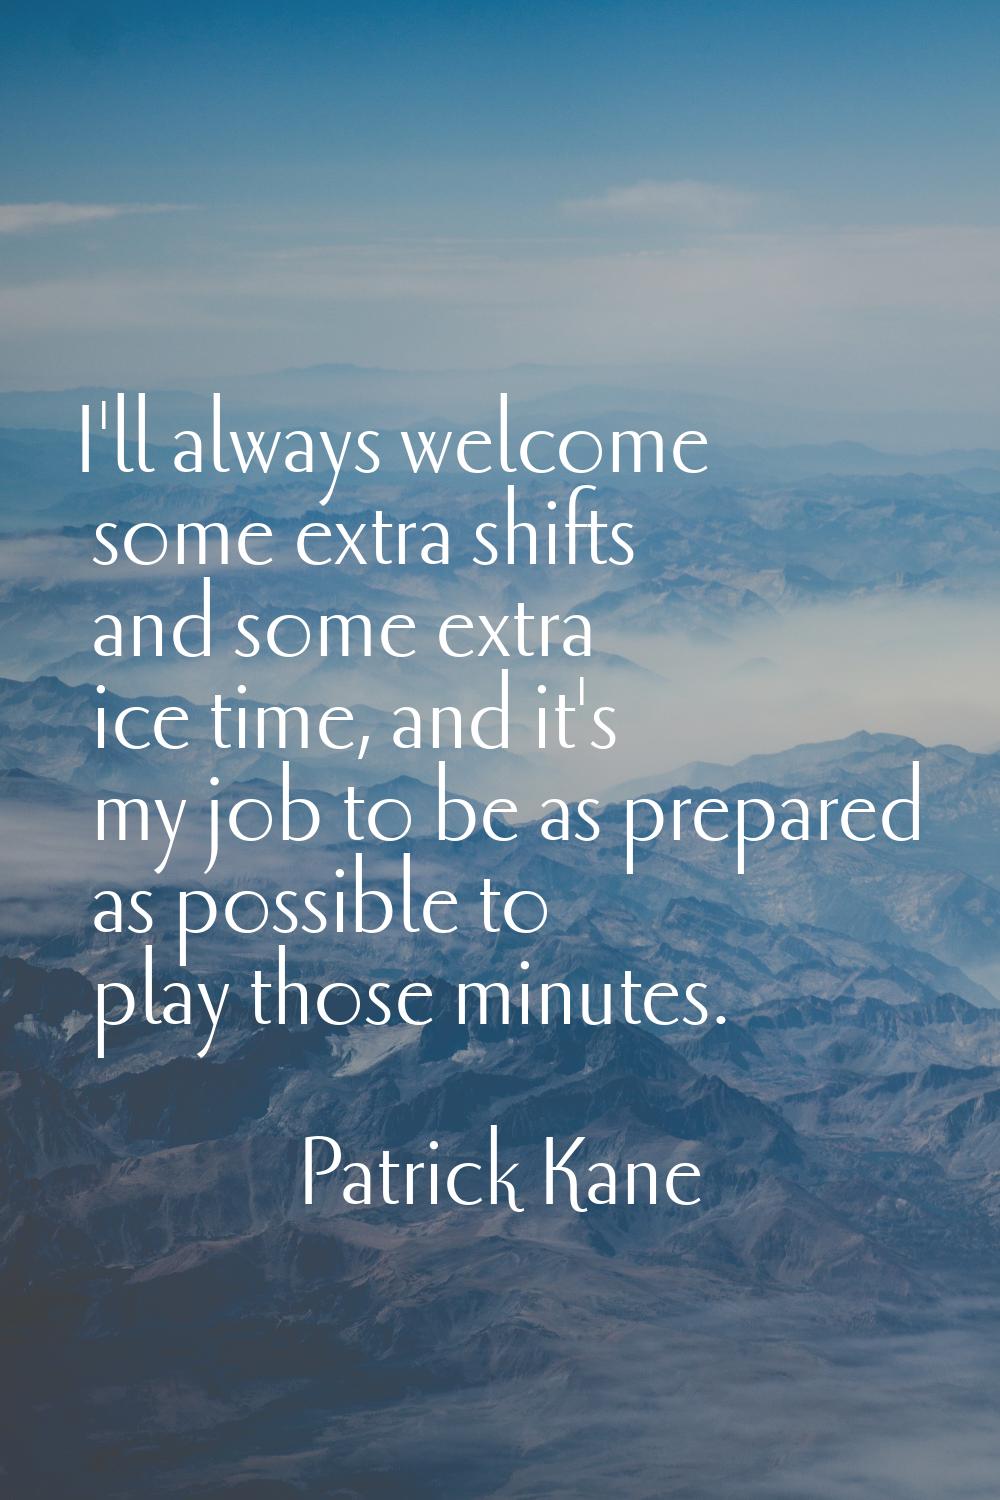 I'll always welcome some extra shifts and some extra ice time, and it's my job to be as prepared as